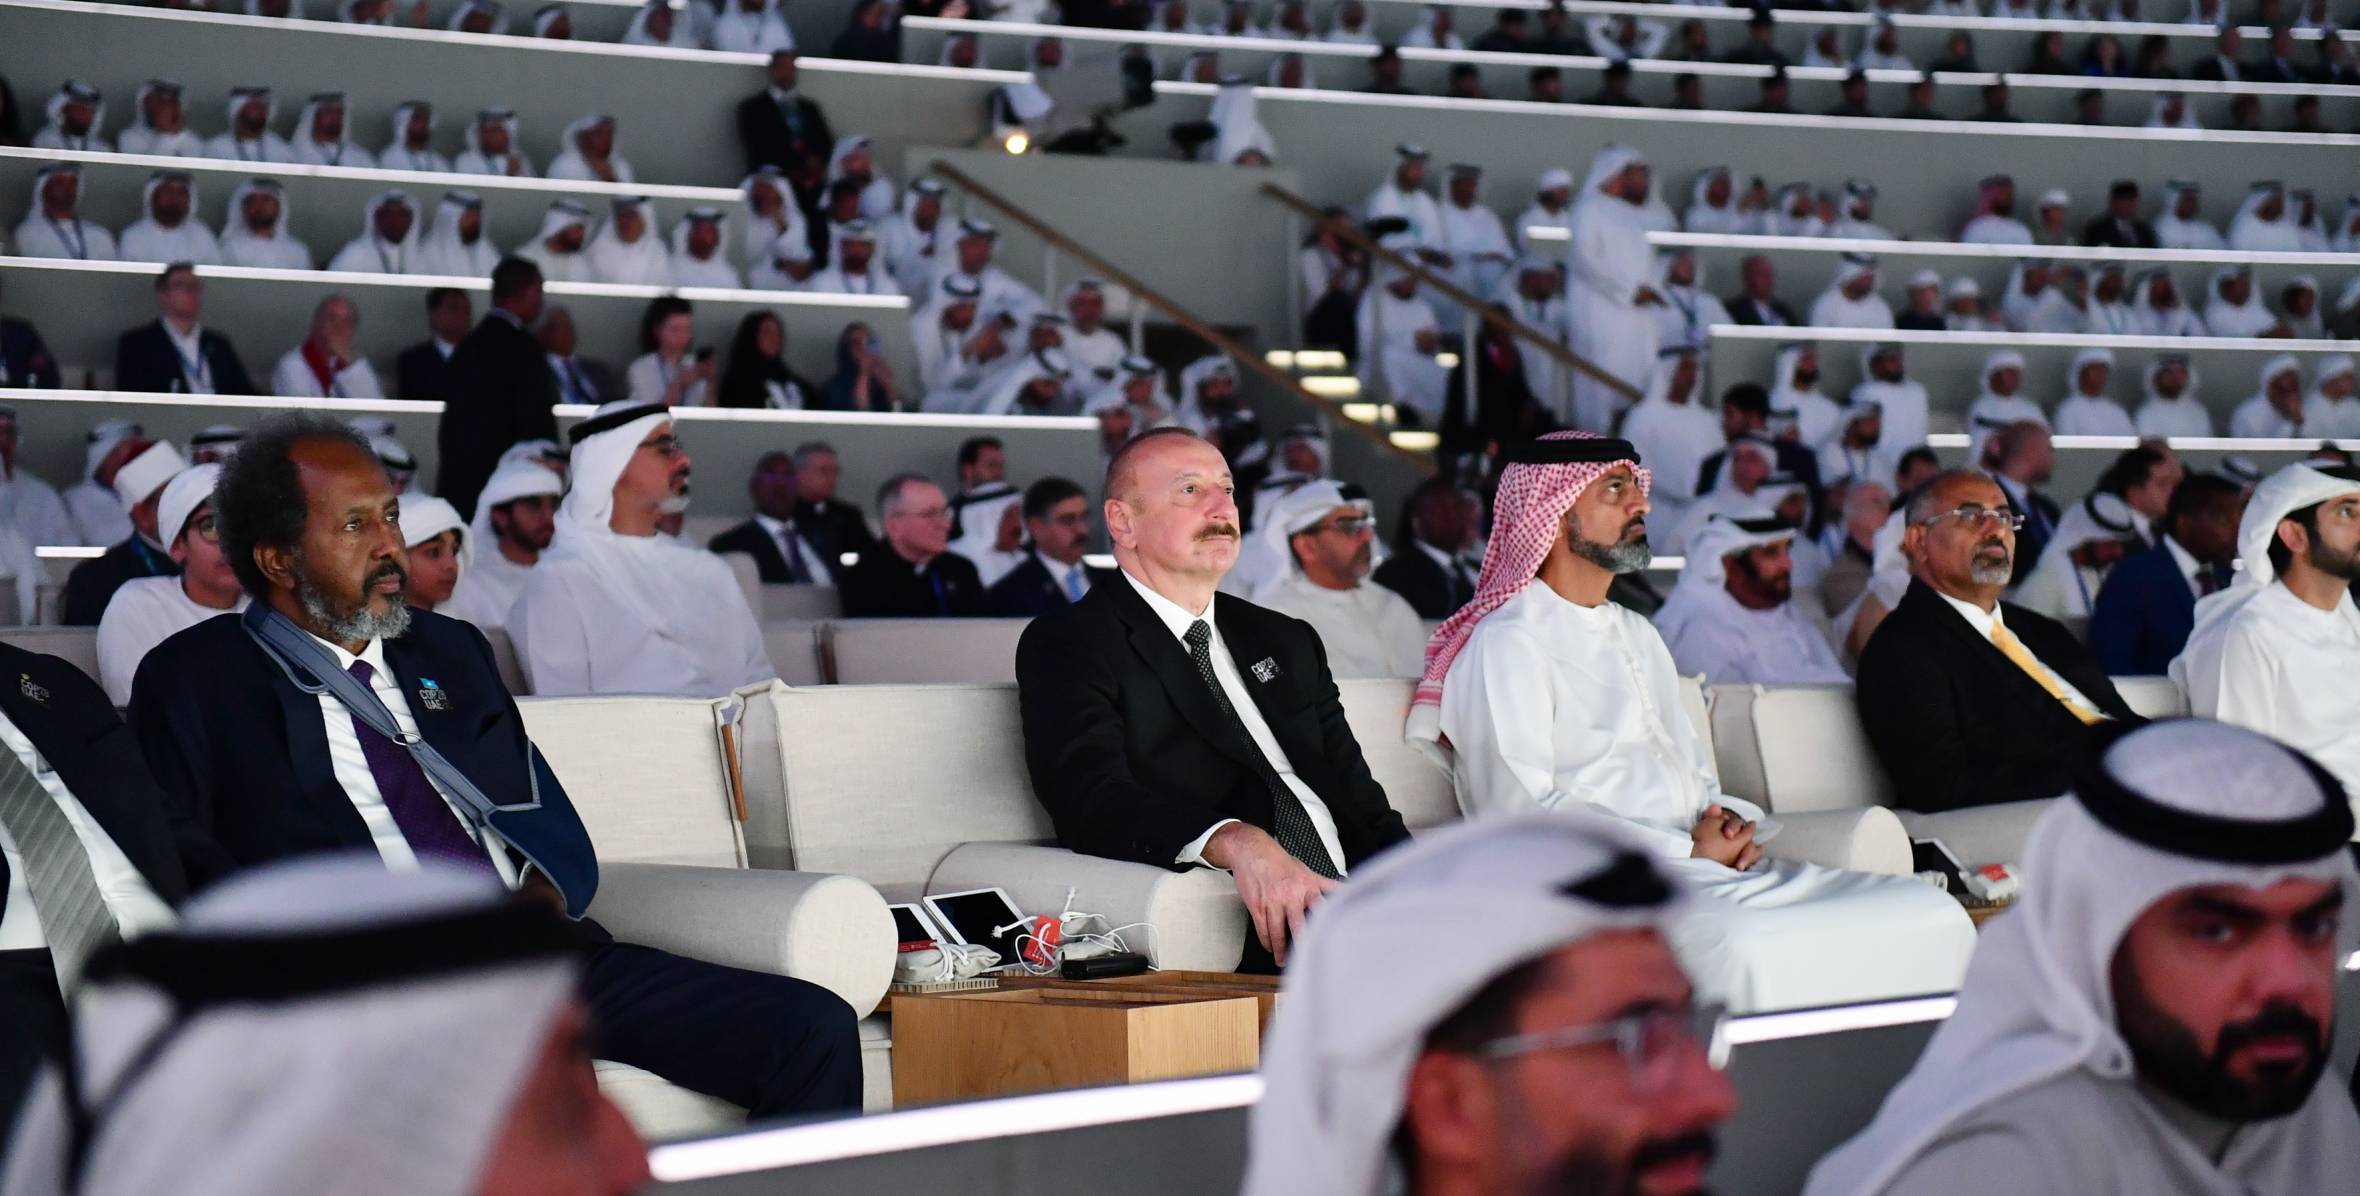 Ilham Aliyev participated in event held on occasion of National Day of United Arab Emirates in Dubai